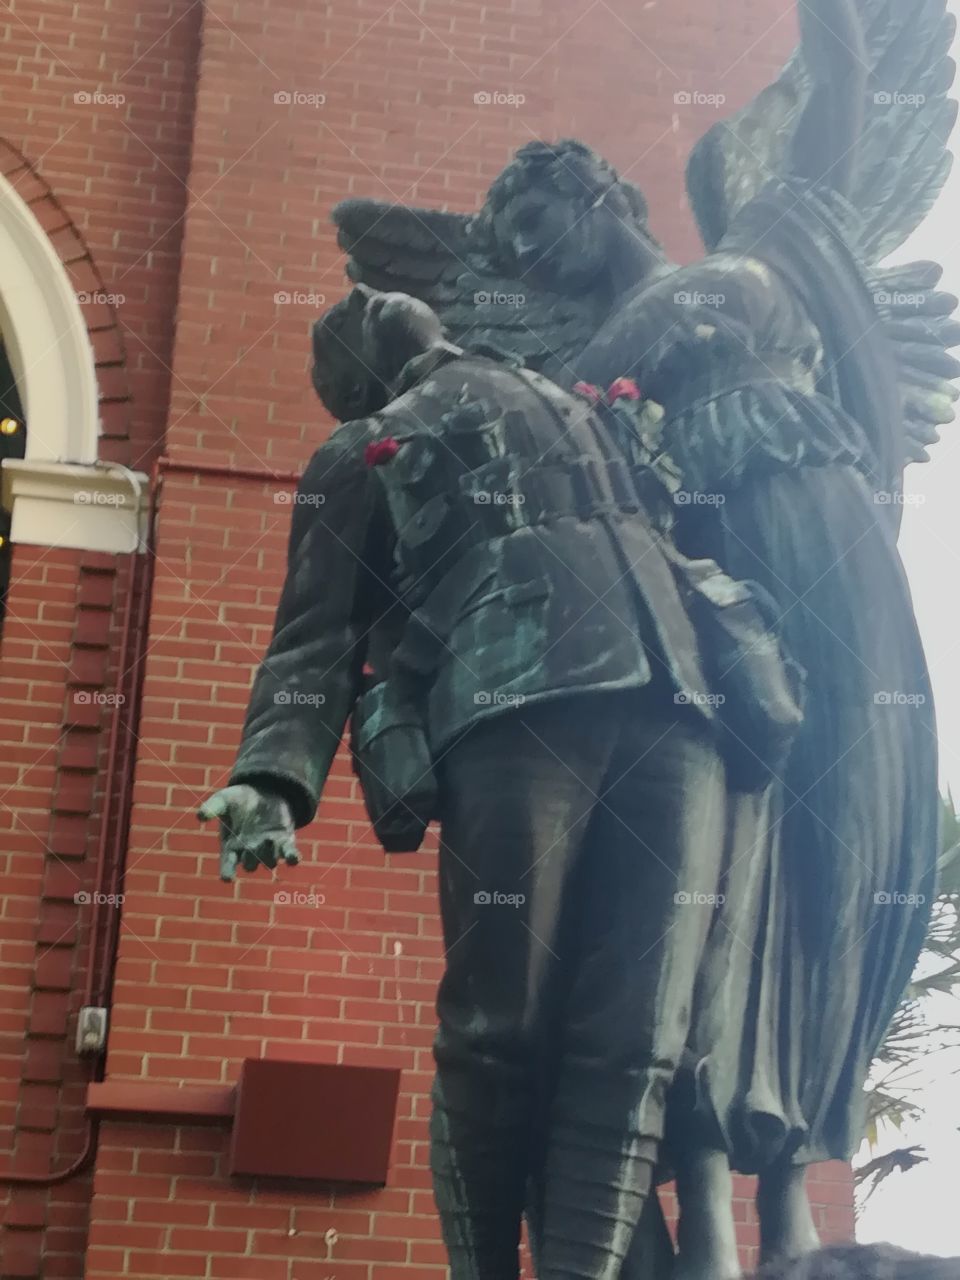 Amazing wwII statue in downtown